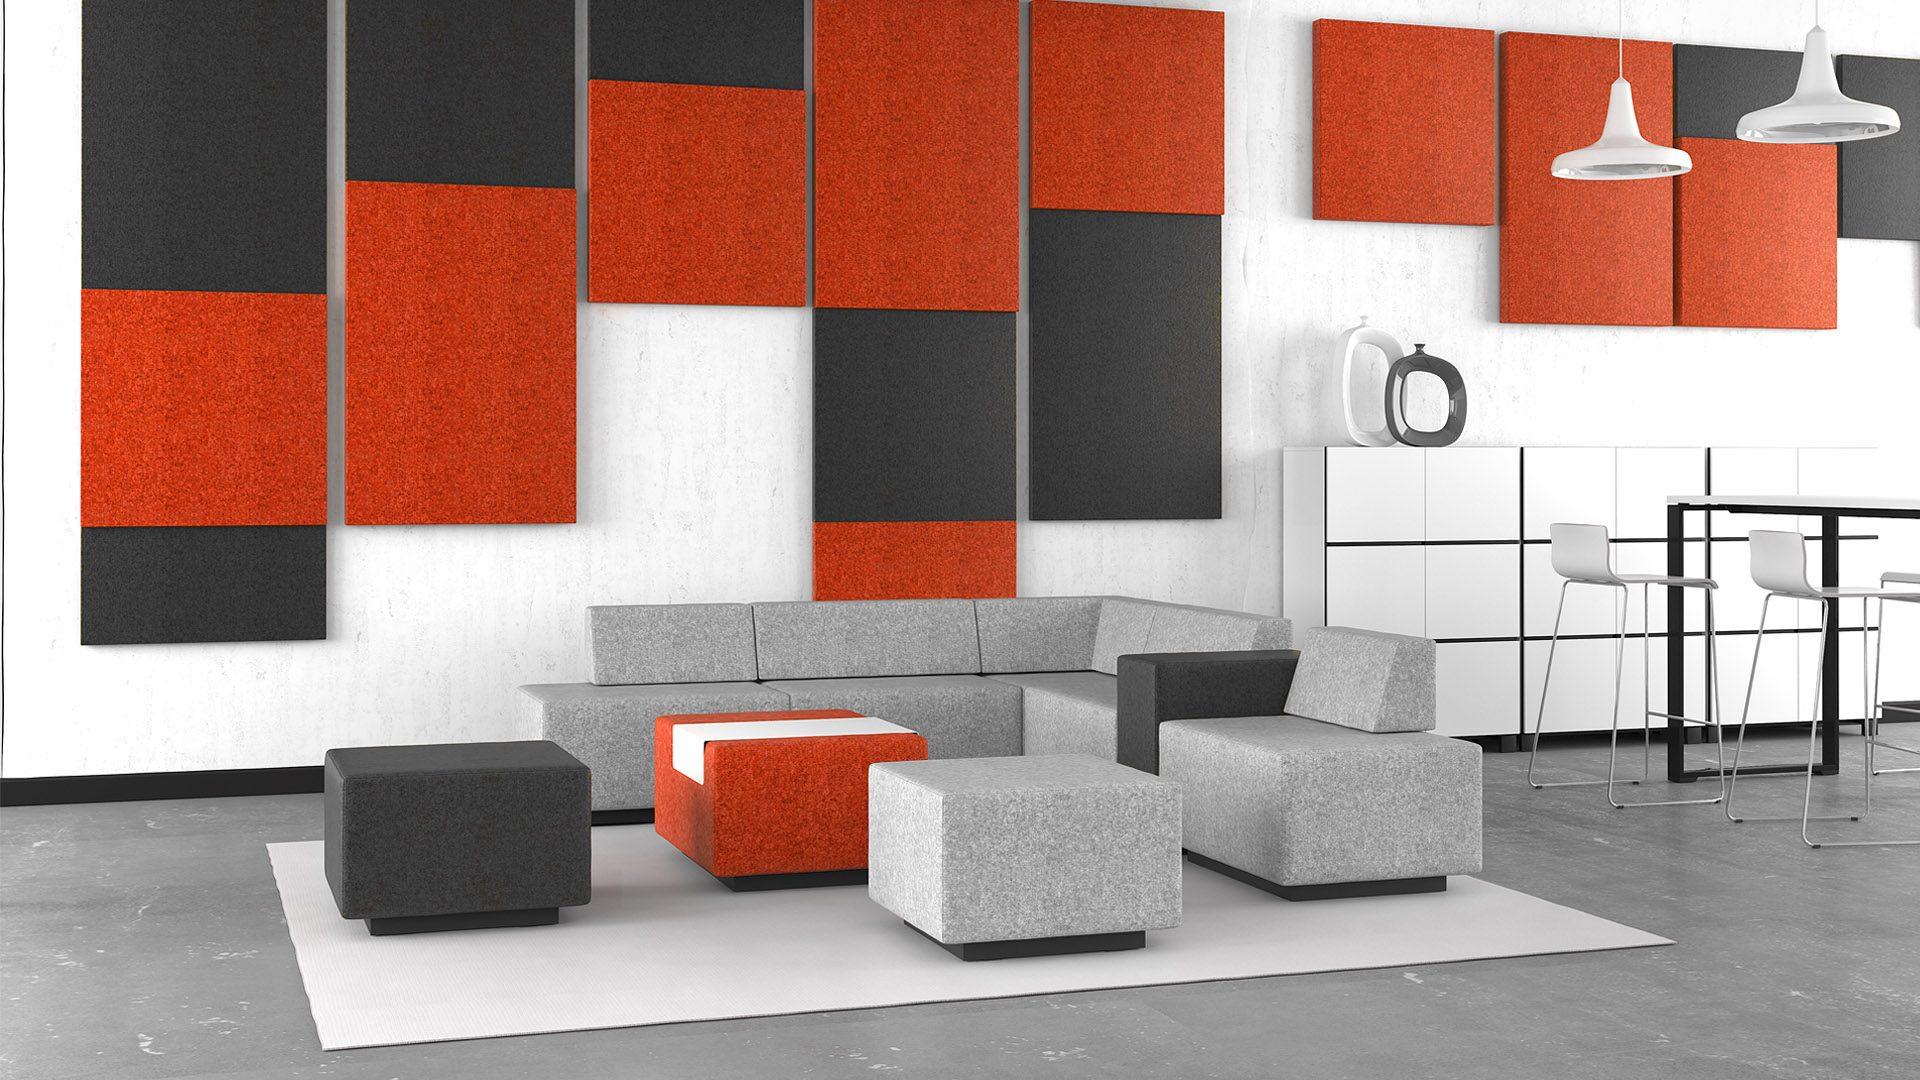 Modus acoustic wall panels with Jazz Chill Out soft modular seating